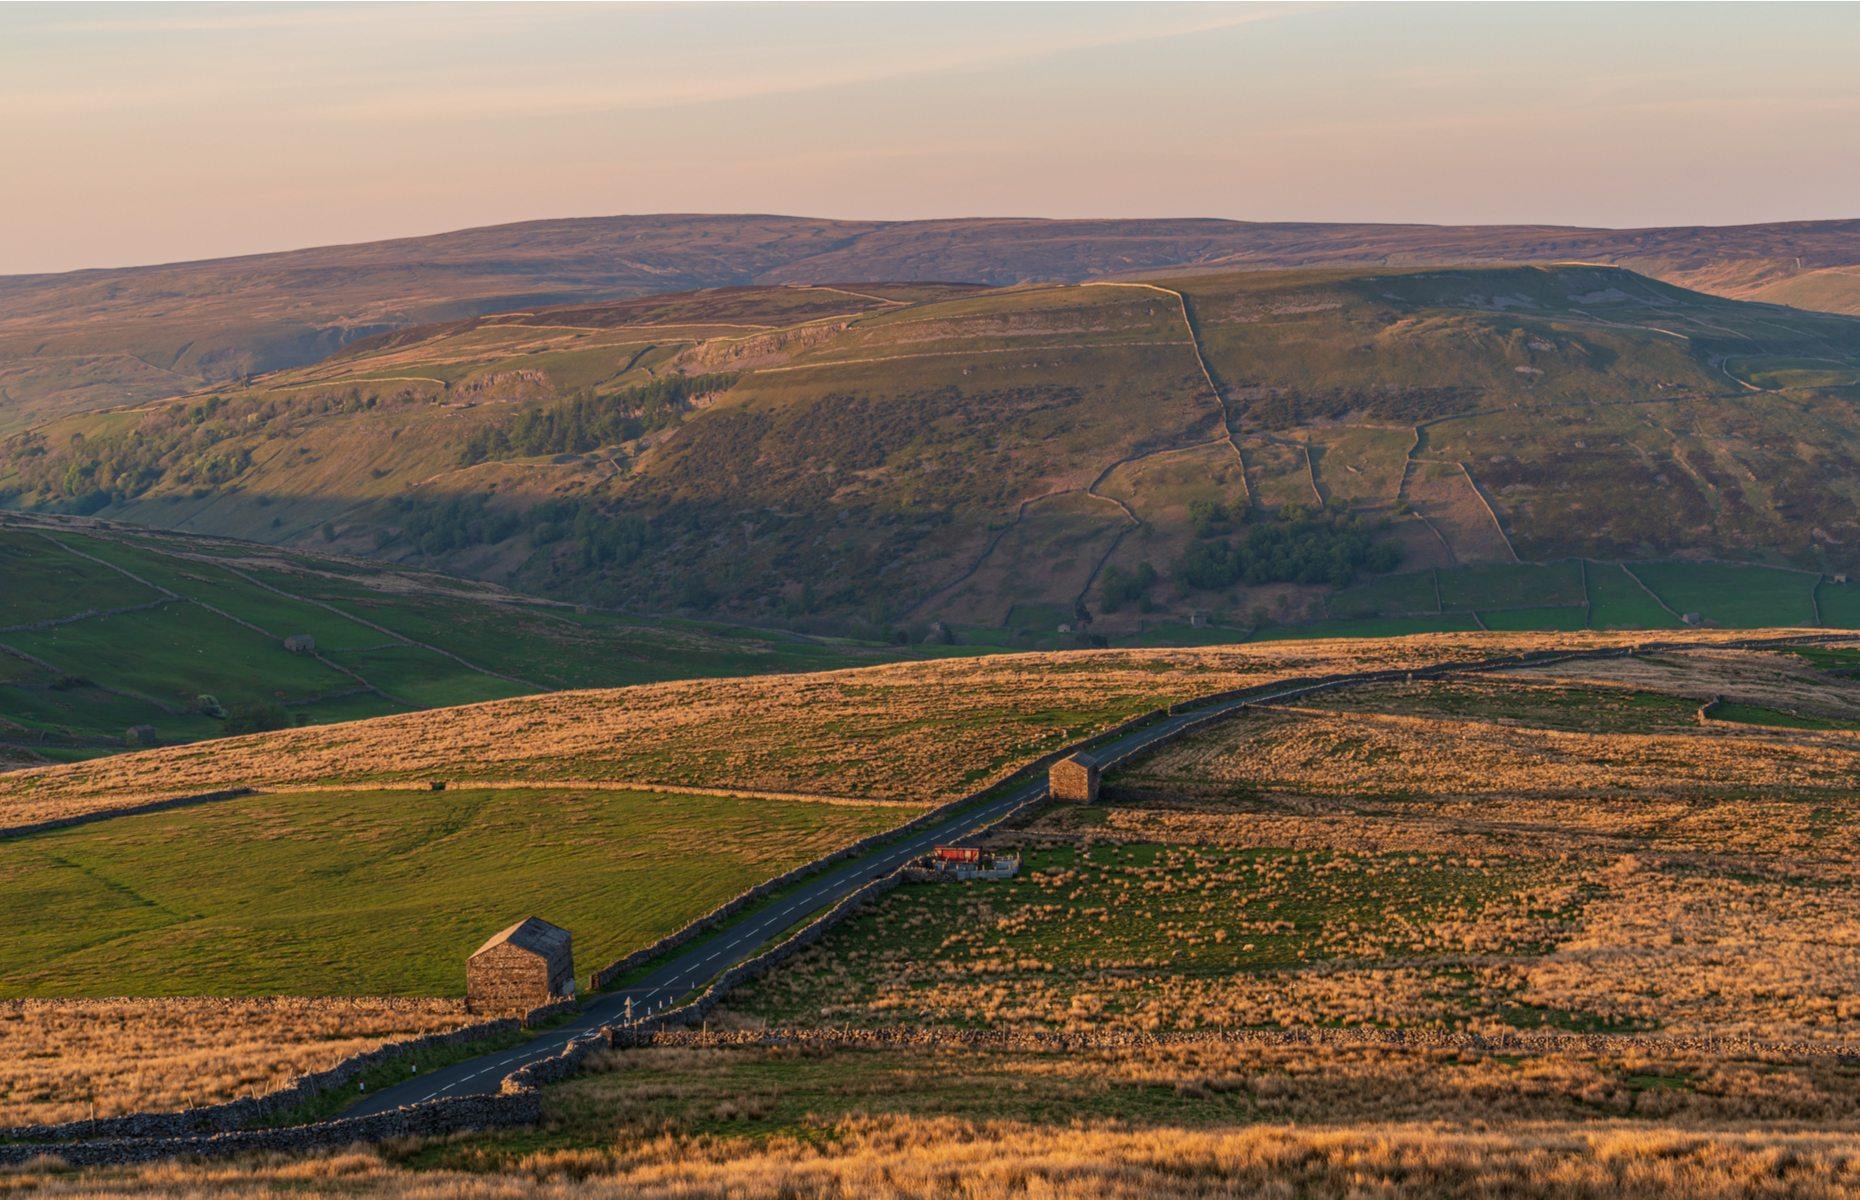 <p>Although the <a href="https://www.loveexploring.com/guides/94251/yorkshire-dales-national-park-northern-england-staycation-weekend-breaks-2020">Yorkshire Dales</a> has plenty of incredible roads highlighting the region’s stunning scenery, possibly the best and most famous route is Buttertubs Pass. Named after the cluster of deep natural limestone potholes that can be found along the road, the pass connects the town of Hawes with the village of Thwaite climbing across the high moorland between Wensleydale and Swaledale.  </p>